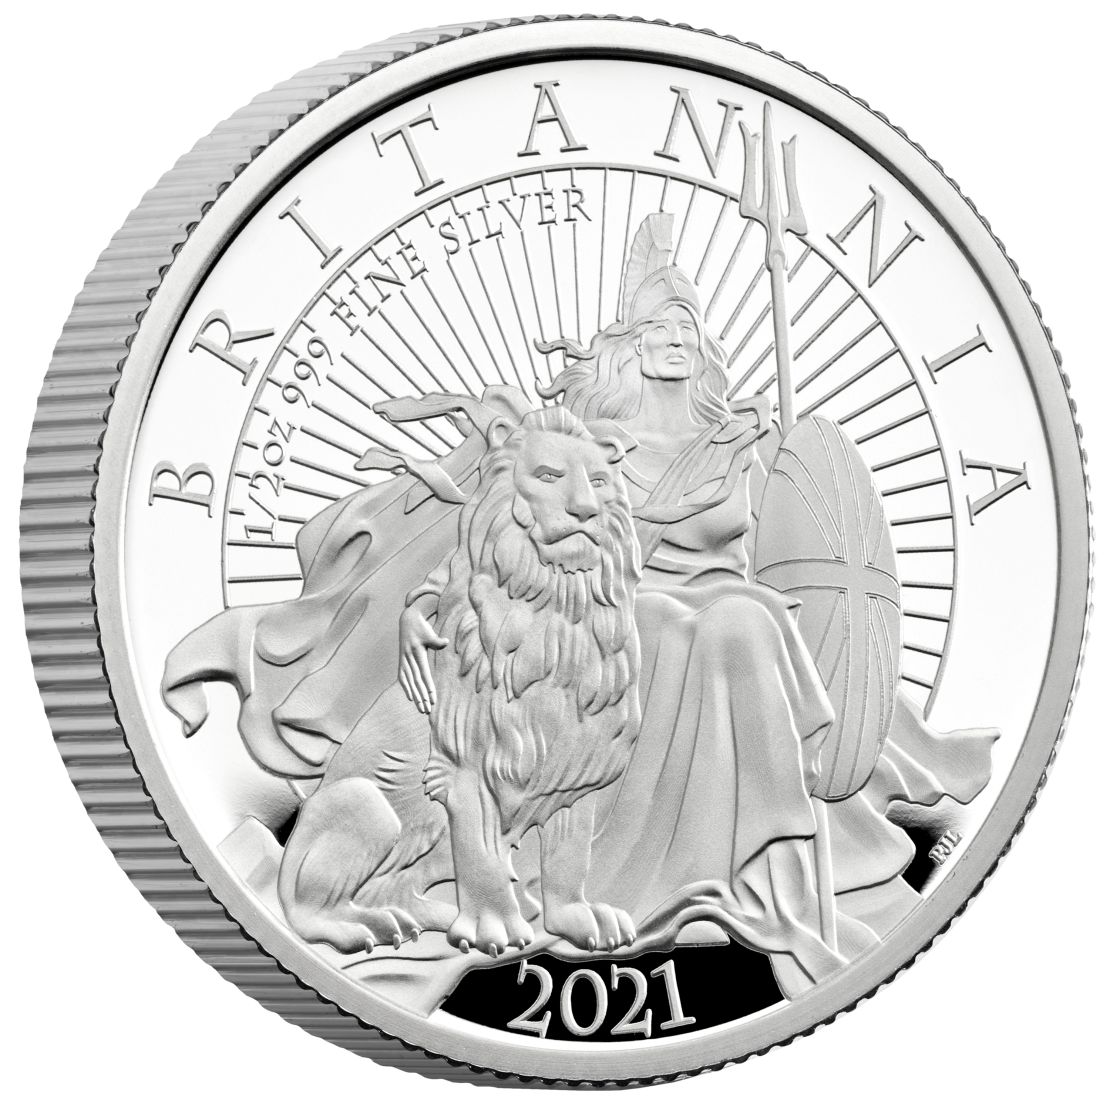 Britannia has been a lasting symbol in UK currency for nearly 350 years.
